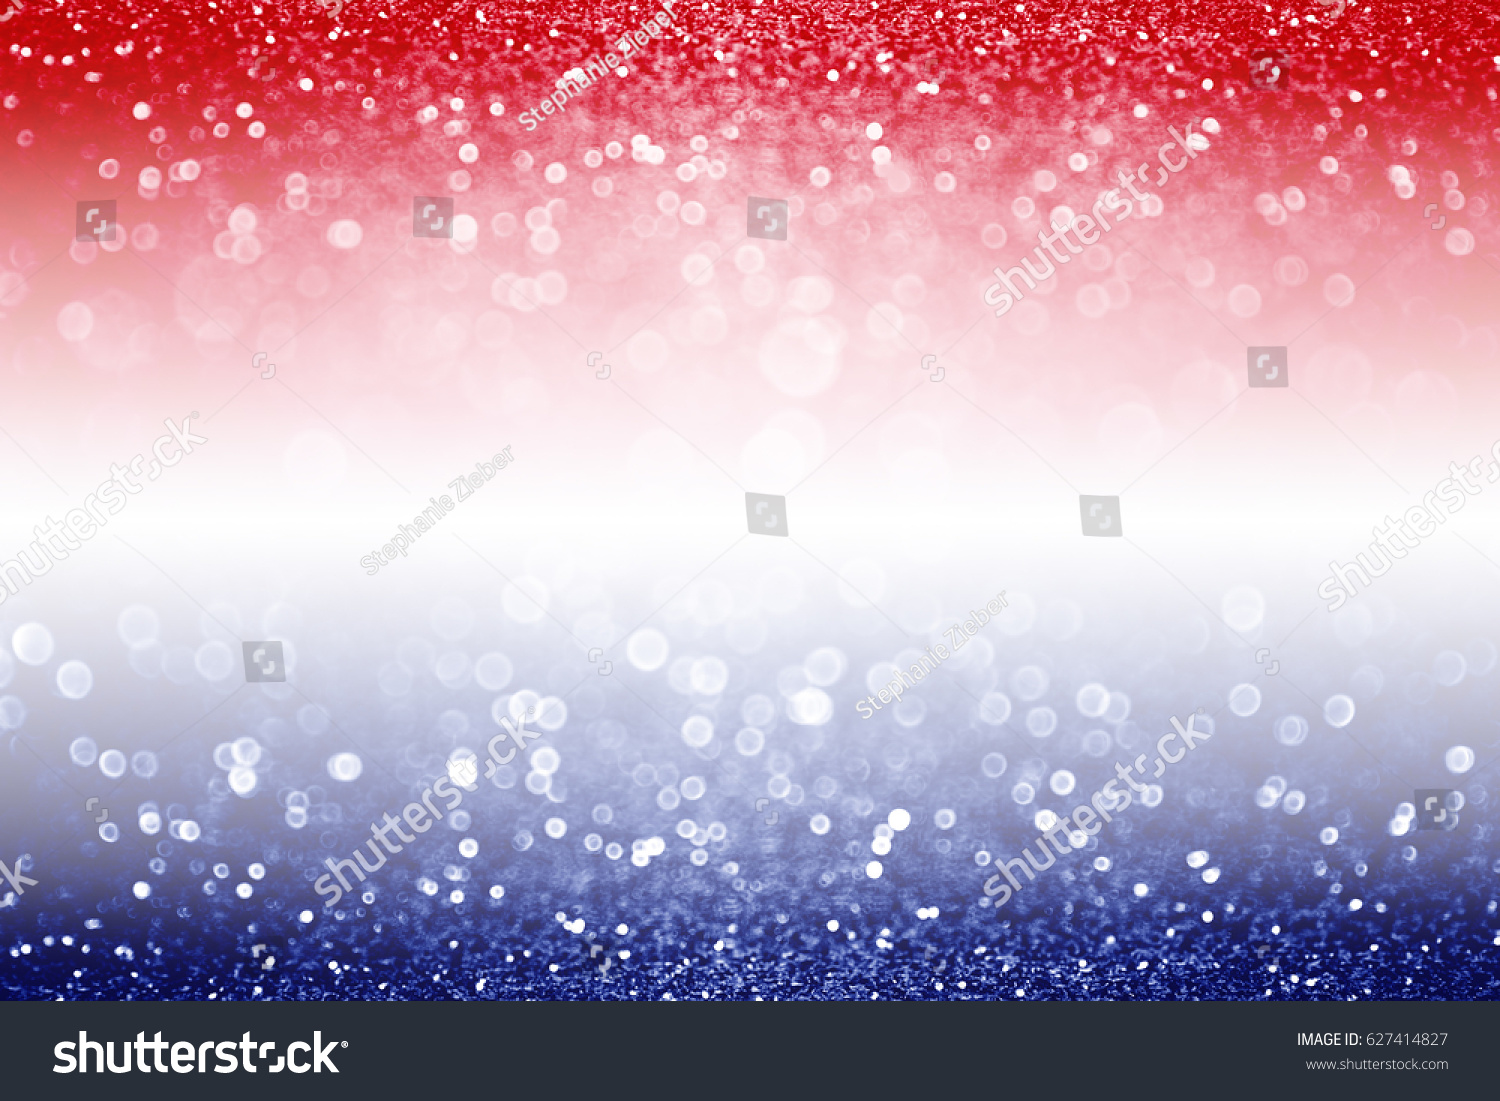 Abstract patriotic red white and blue glitter sparkle background for voting, memorials, labor day and elections #627414827